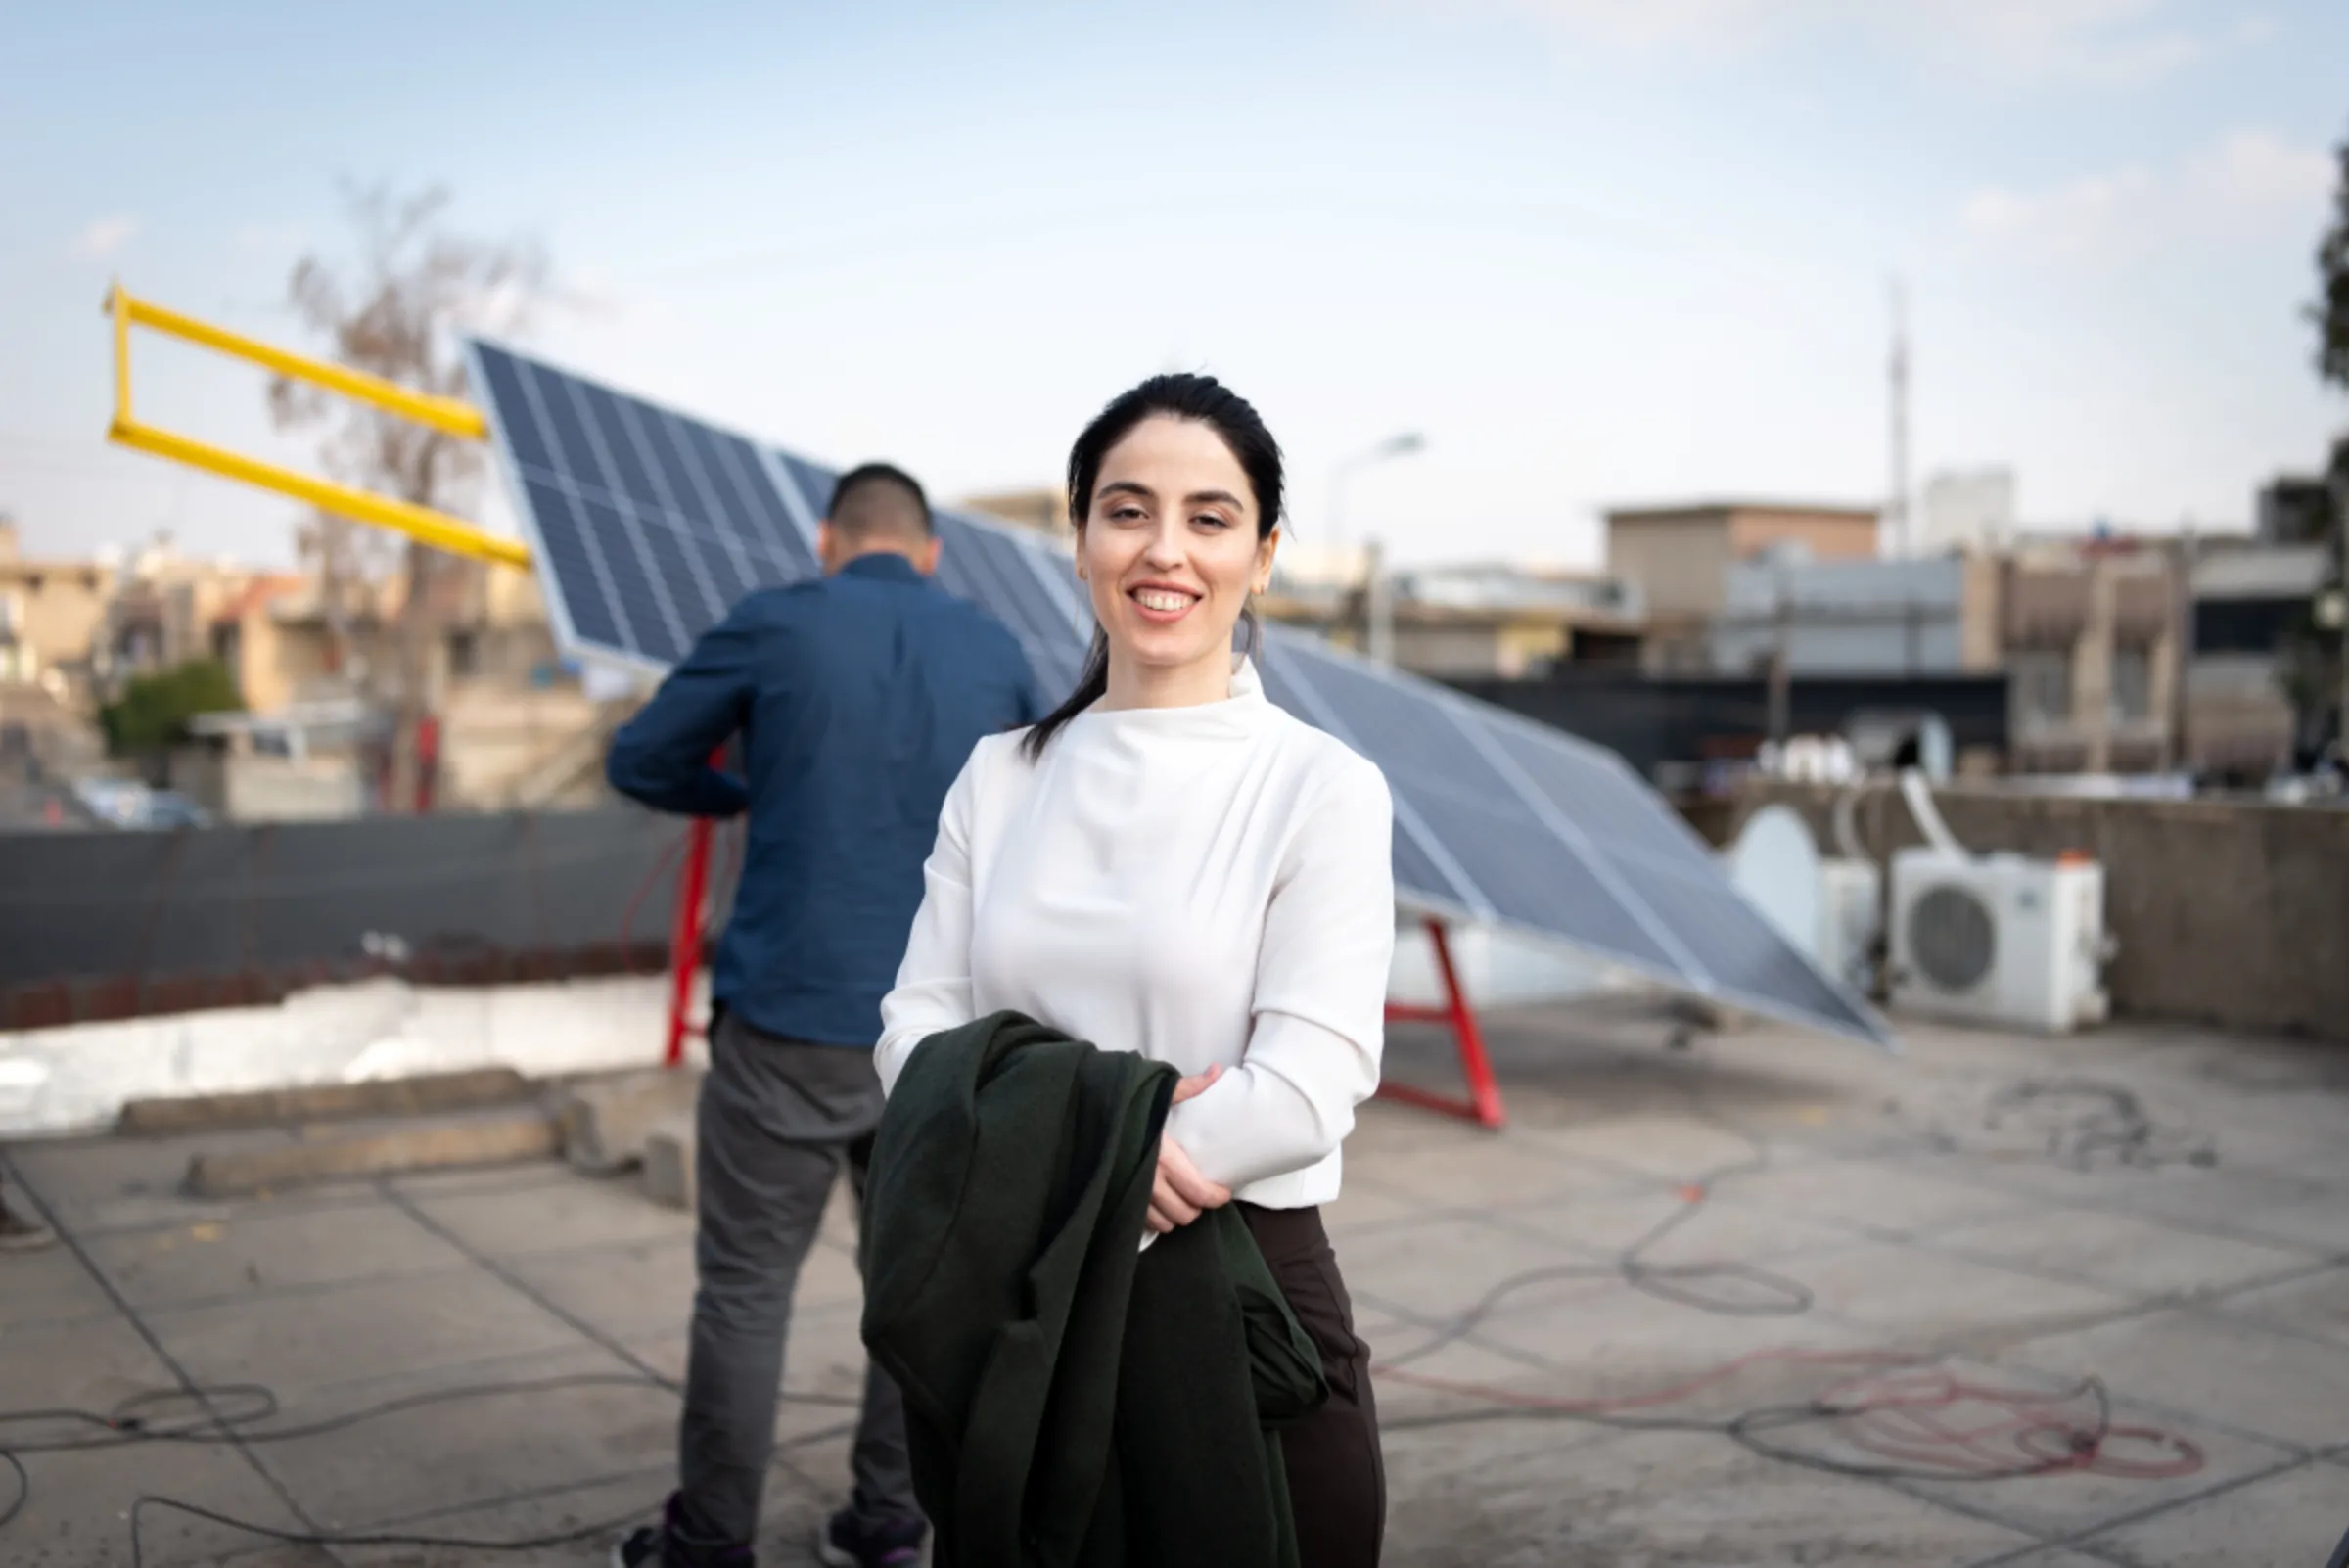 Basima Abdulrahman, founder and CEO of Kesk, poses for a photo in front of a solar panel in this undated handout CWI2021/Handout via Thomson Reuters Foundation